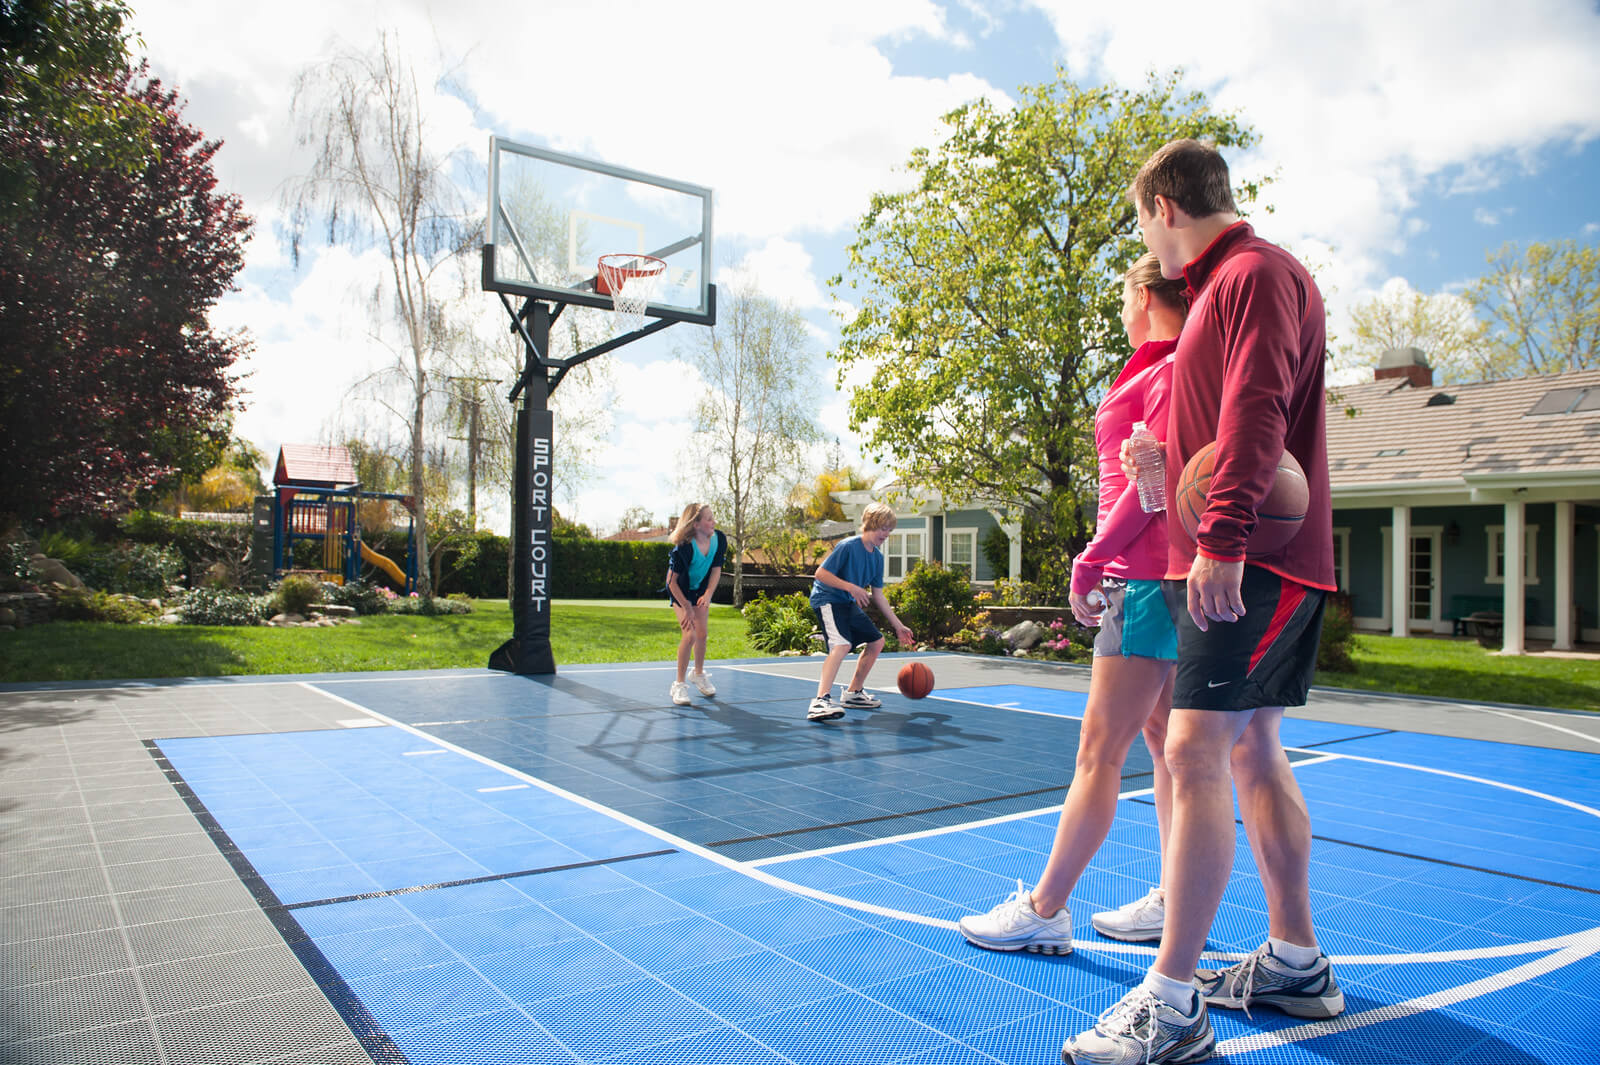 Residential Backyard Sport Court Game Court, Basketball Court | Spend Time With Family and Children | AllSport America